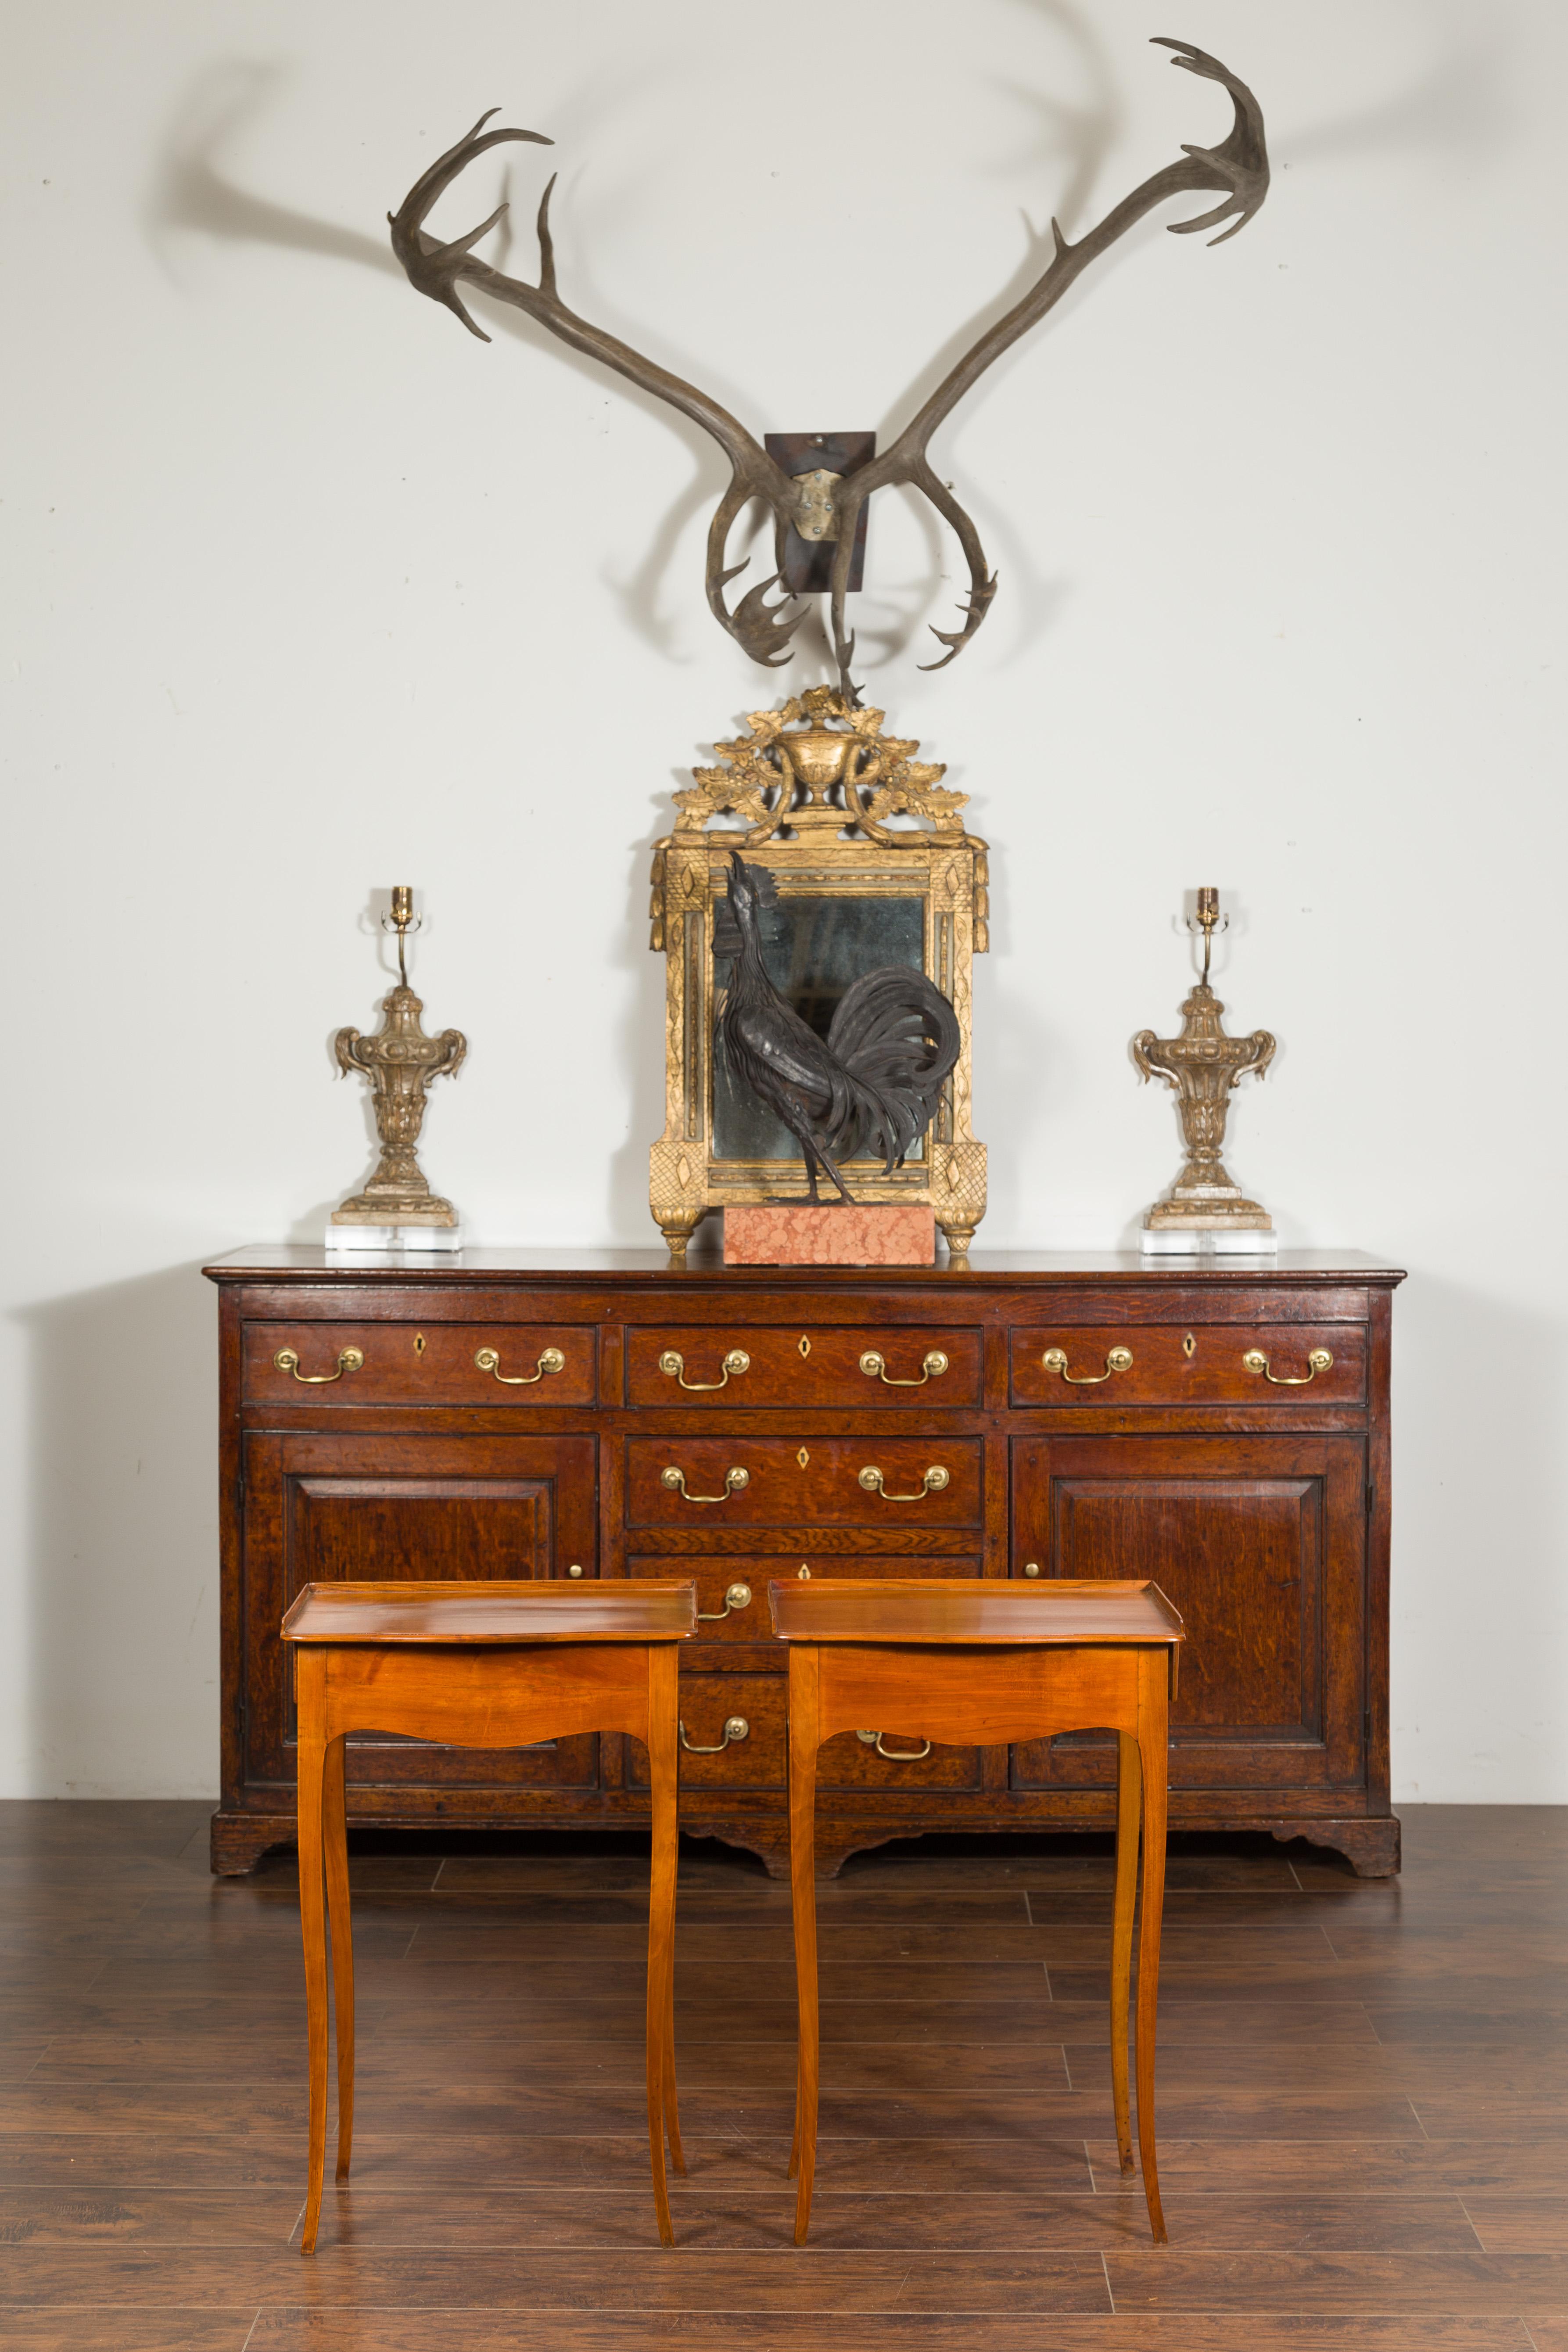 A pair of French Napoleon III period walnut side tables from the mid-19th century, with lateral drawers and scalloped aprons. Created in France during the reign of Emperor Napoleon III, each of this pair of side tables features a rectangular top